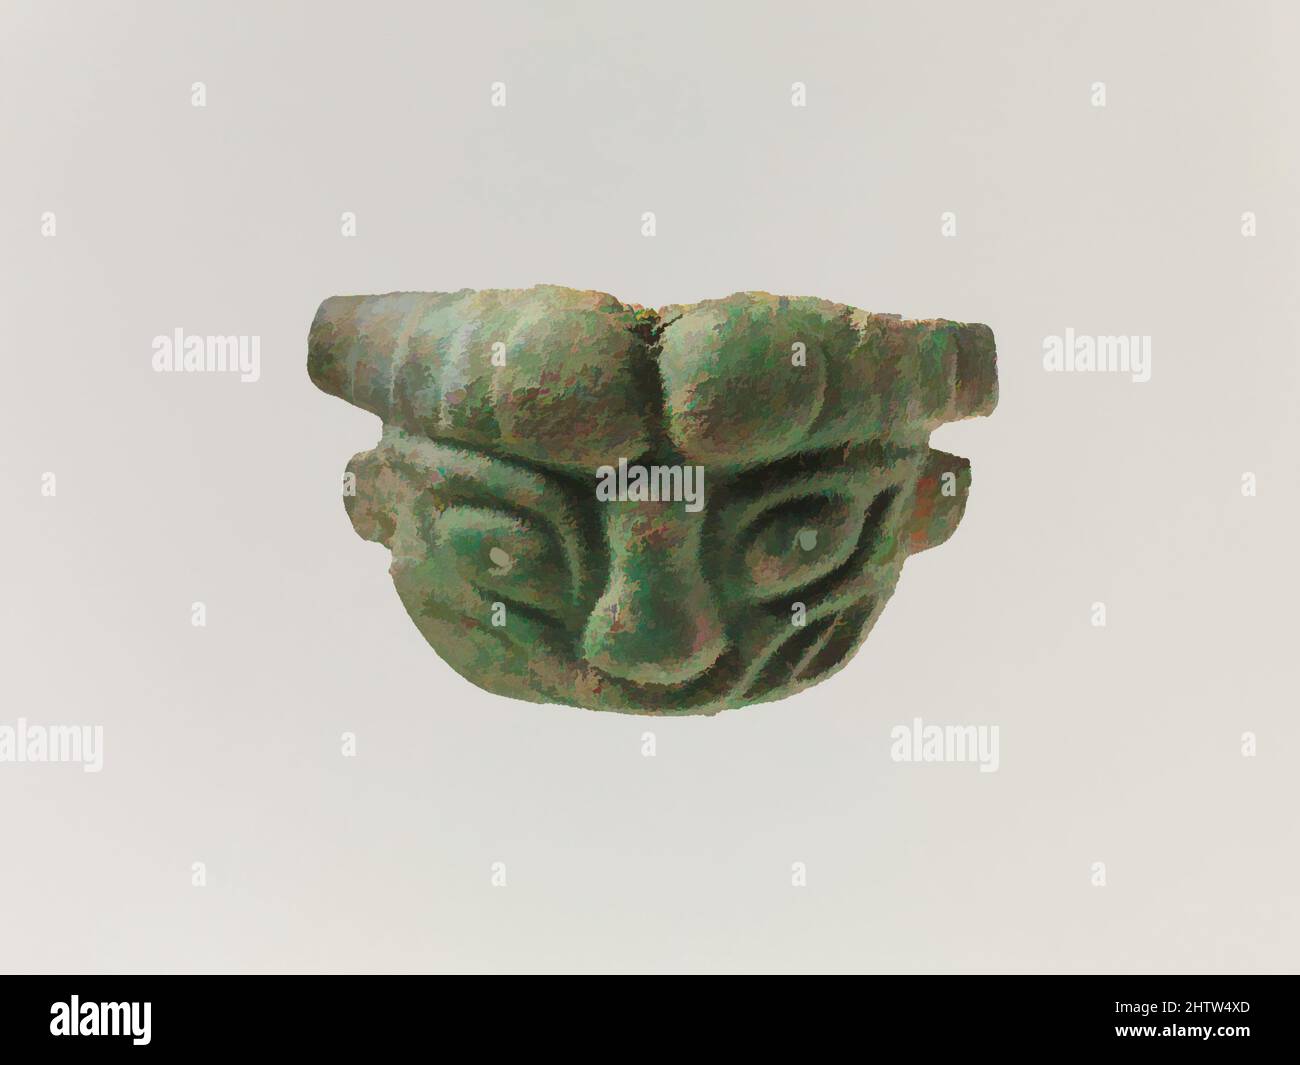 Art inspired by Mask of a Lion, Western Zhou dynasty (1046–771 B.C.), China, Bronze, H. 2 1/8 in. (5.4 cm); W. 3 1/2 in. (8.9 cm), Metalwork, Classic works modernized by Artotop with a splash of modernity. Shapes, color and value, eye-catching visual impact on art. Emotions through freedom of artworks in a contemporary way. A timeless message pursuing a wildly creative new direction. Artists turning to the digital medium and creating the Artotop NFT Stock Photo